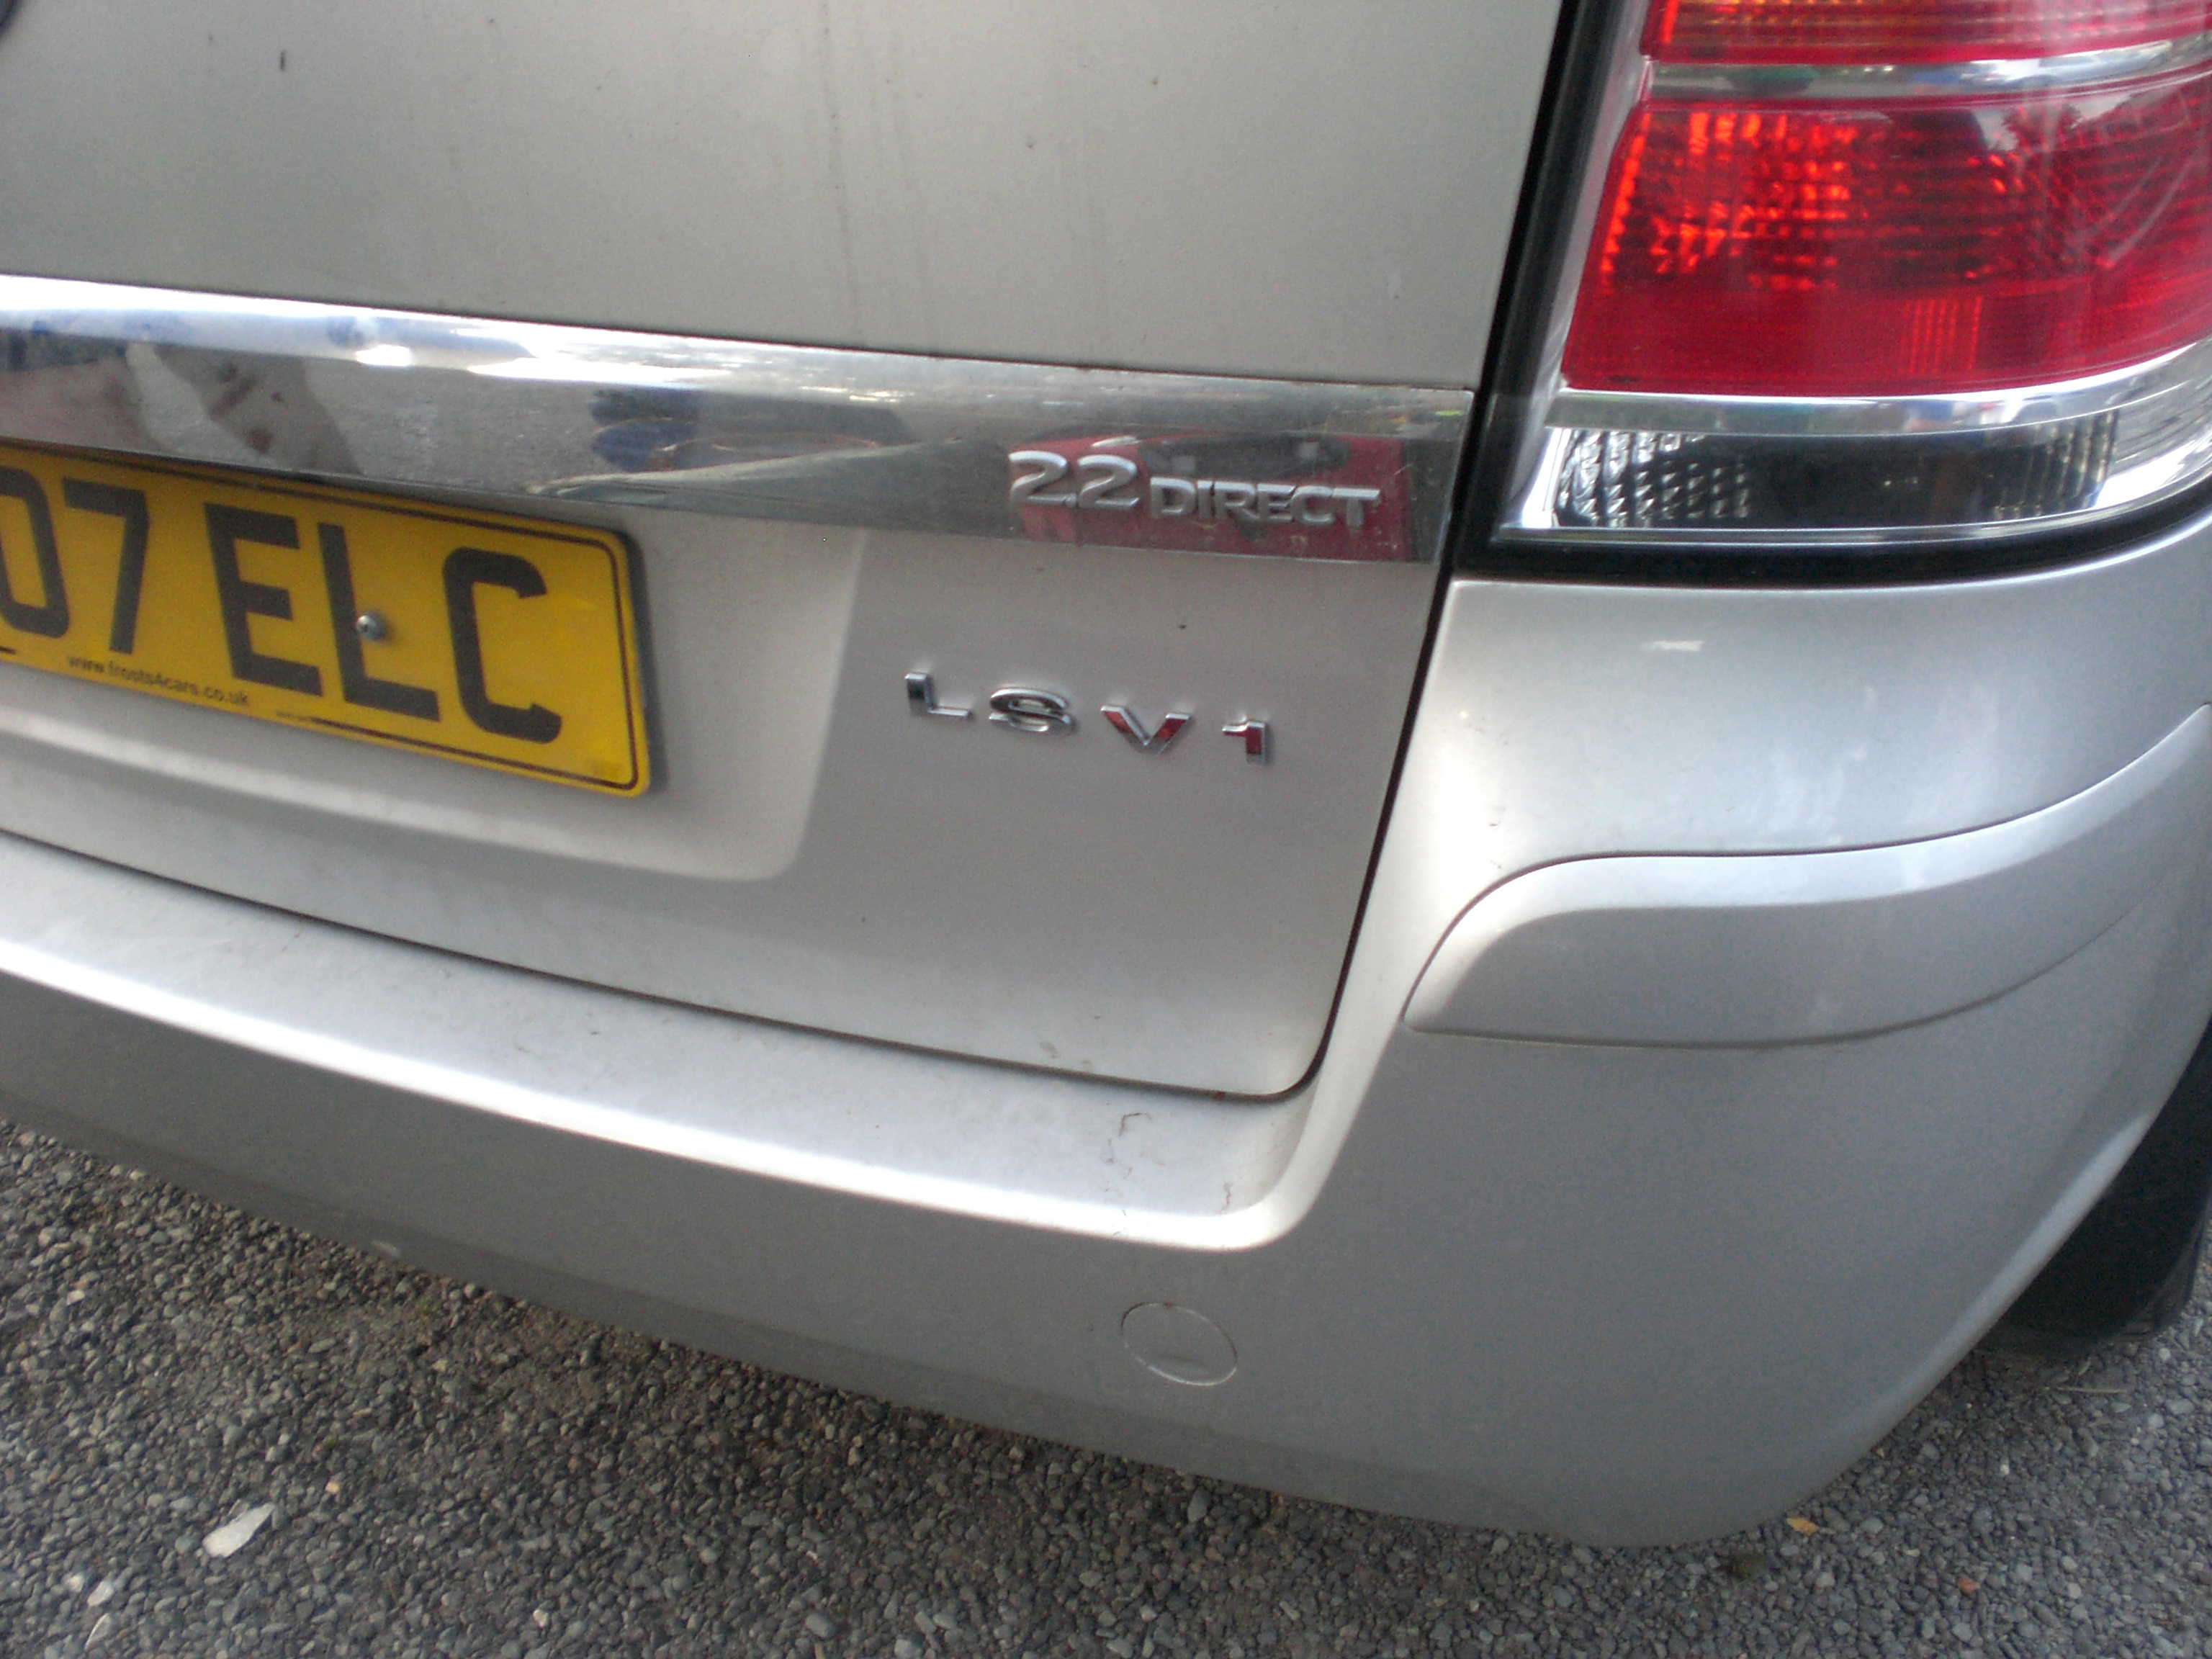 LSV insignia applied